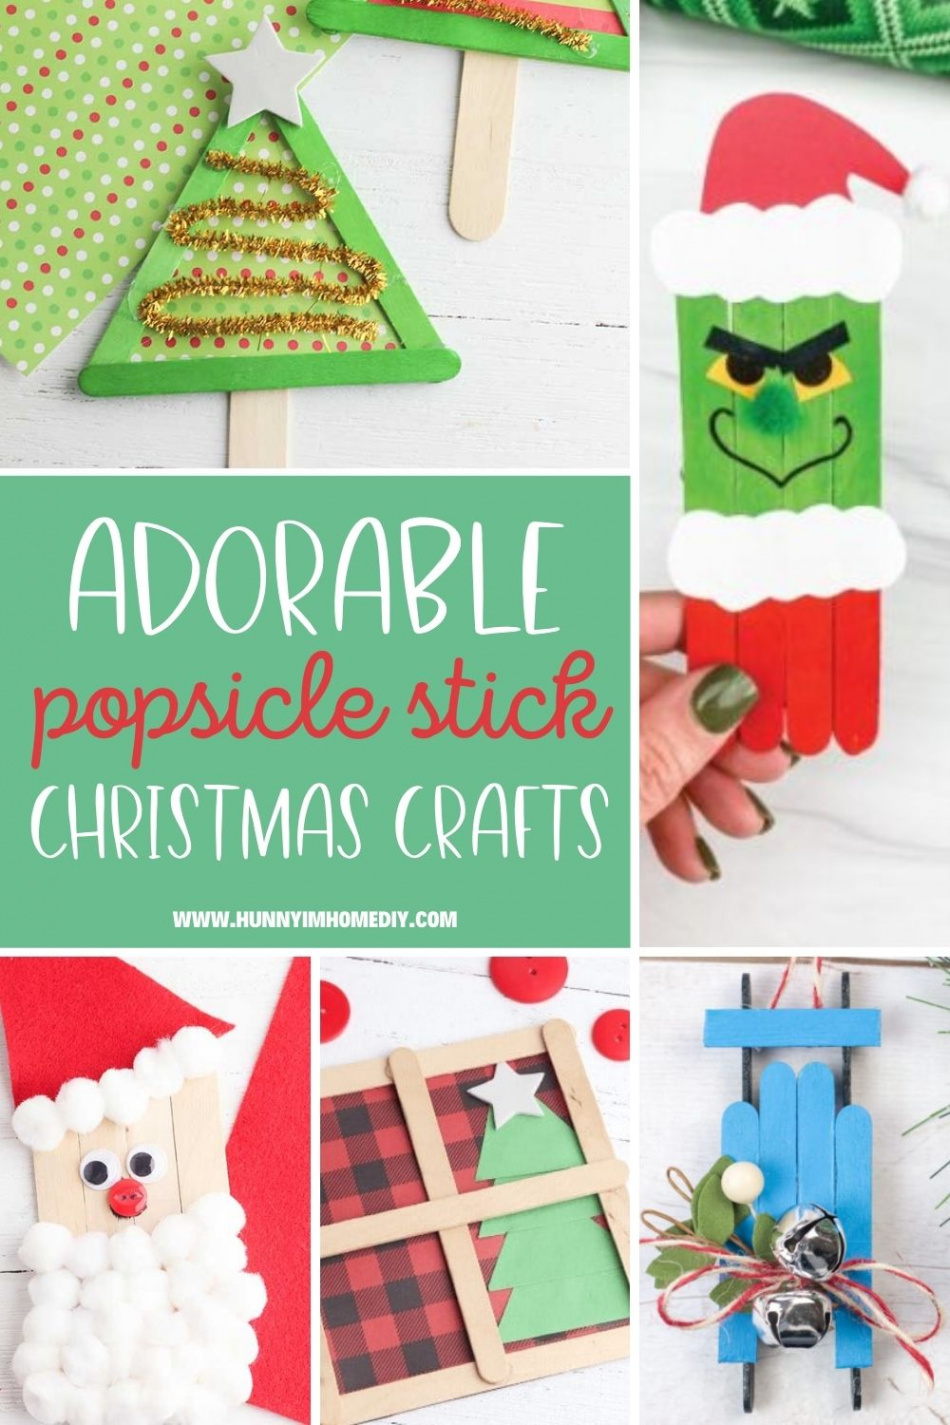 Adorable Popsicle Stick Christmas Crafts For Your Kids to Make